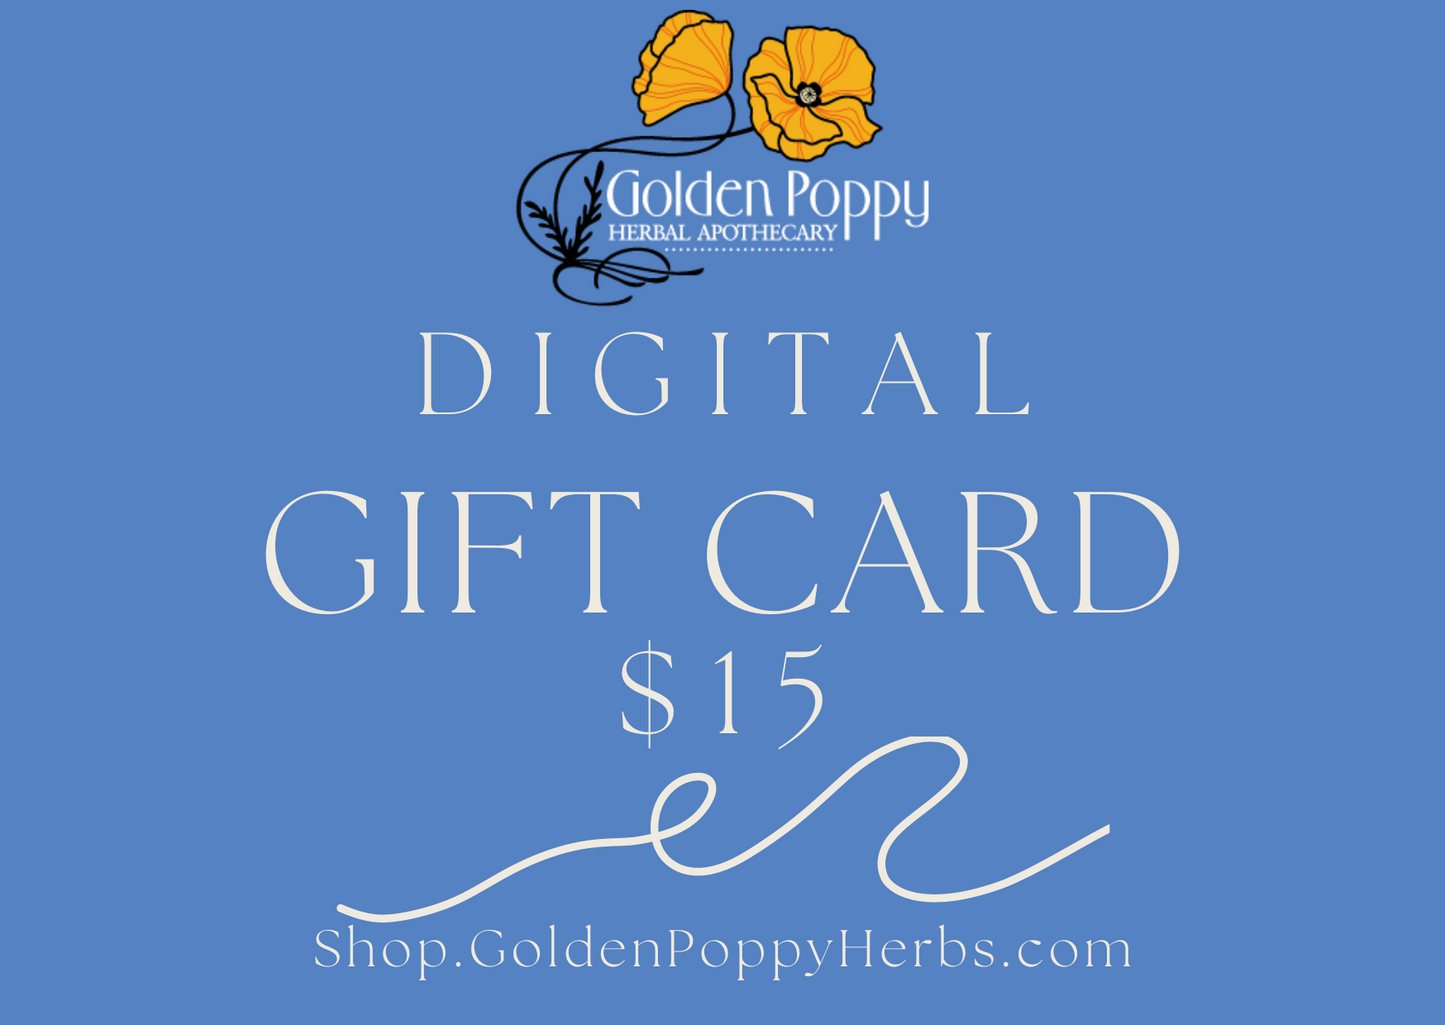 Golden Poppy Herbal Apothecary DIGITAL Gift Card